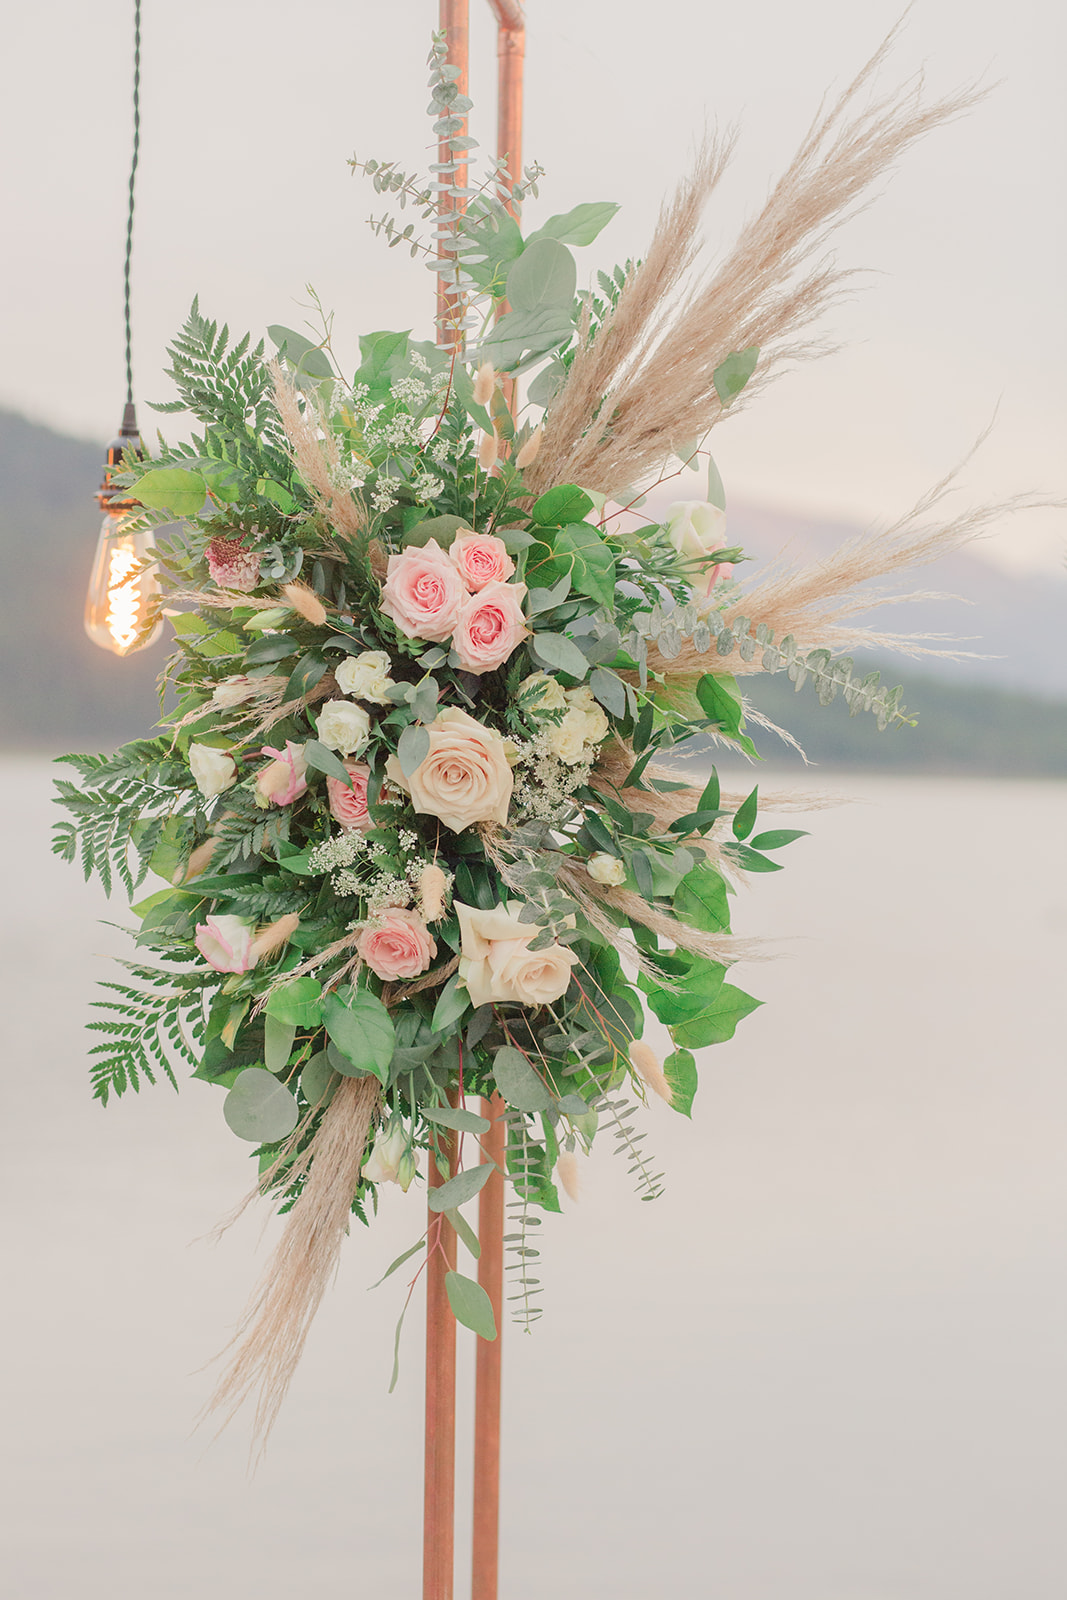 Blush blooms and florals for intimate wedding decor featuring industrial lights